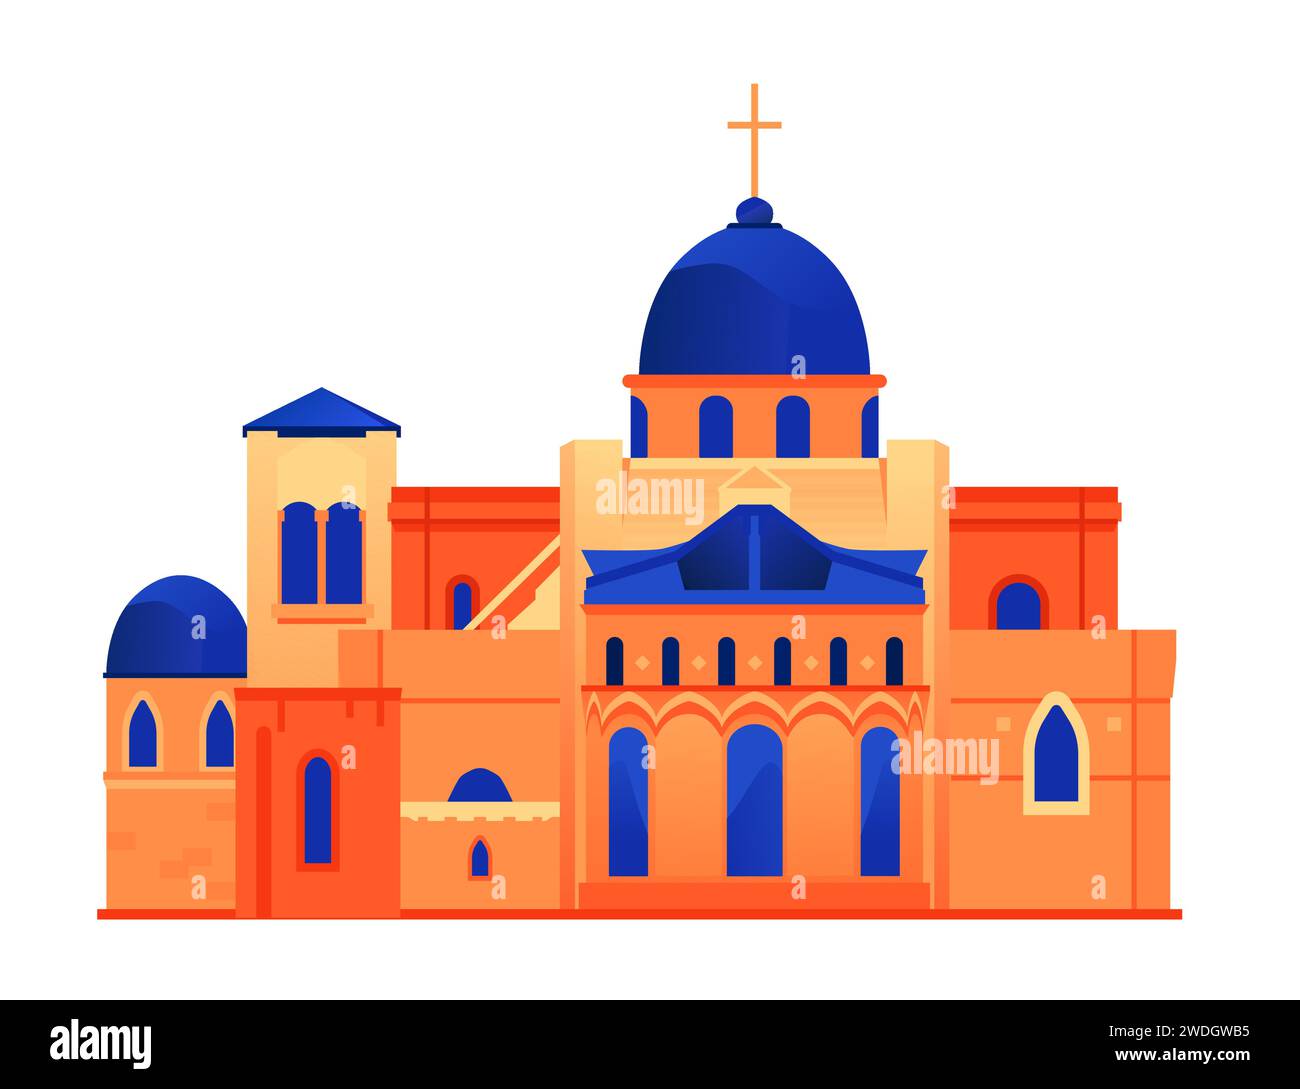 Church of the Holy Sepulcher - flat design style single isolated image Stock Vector